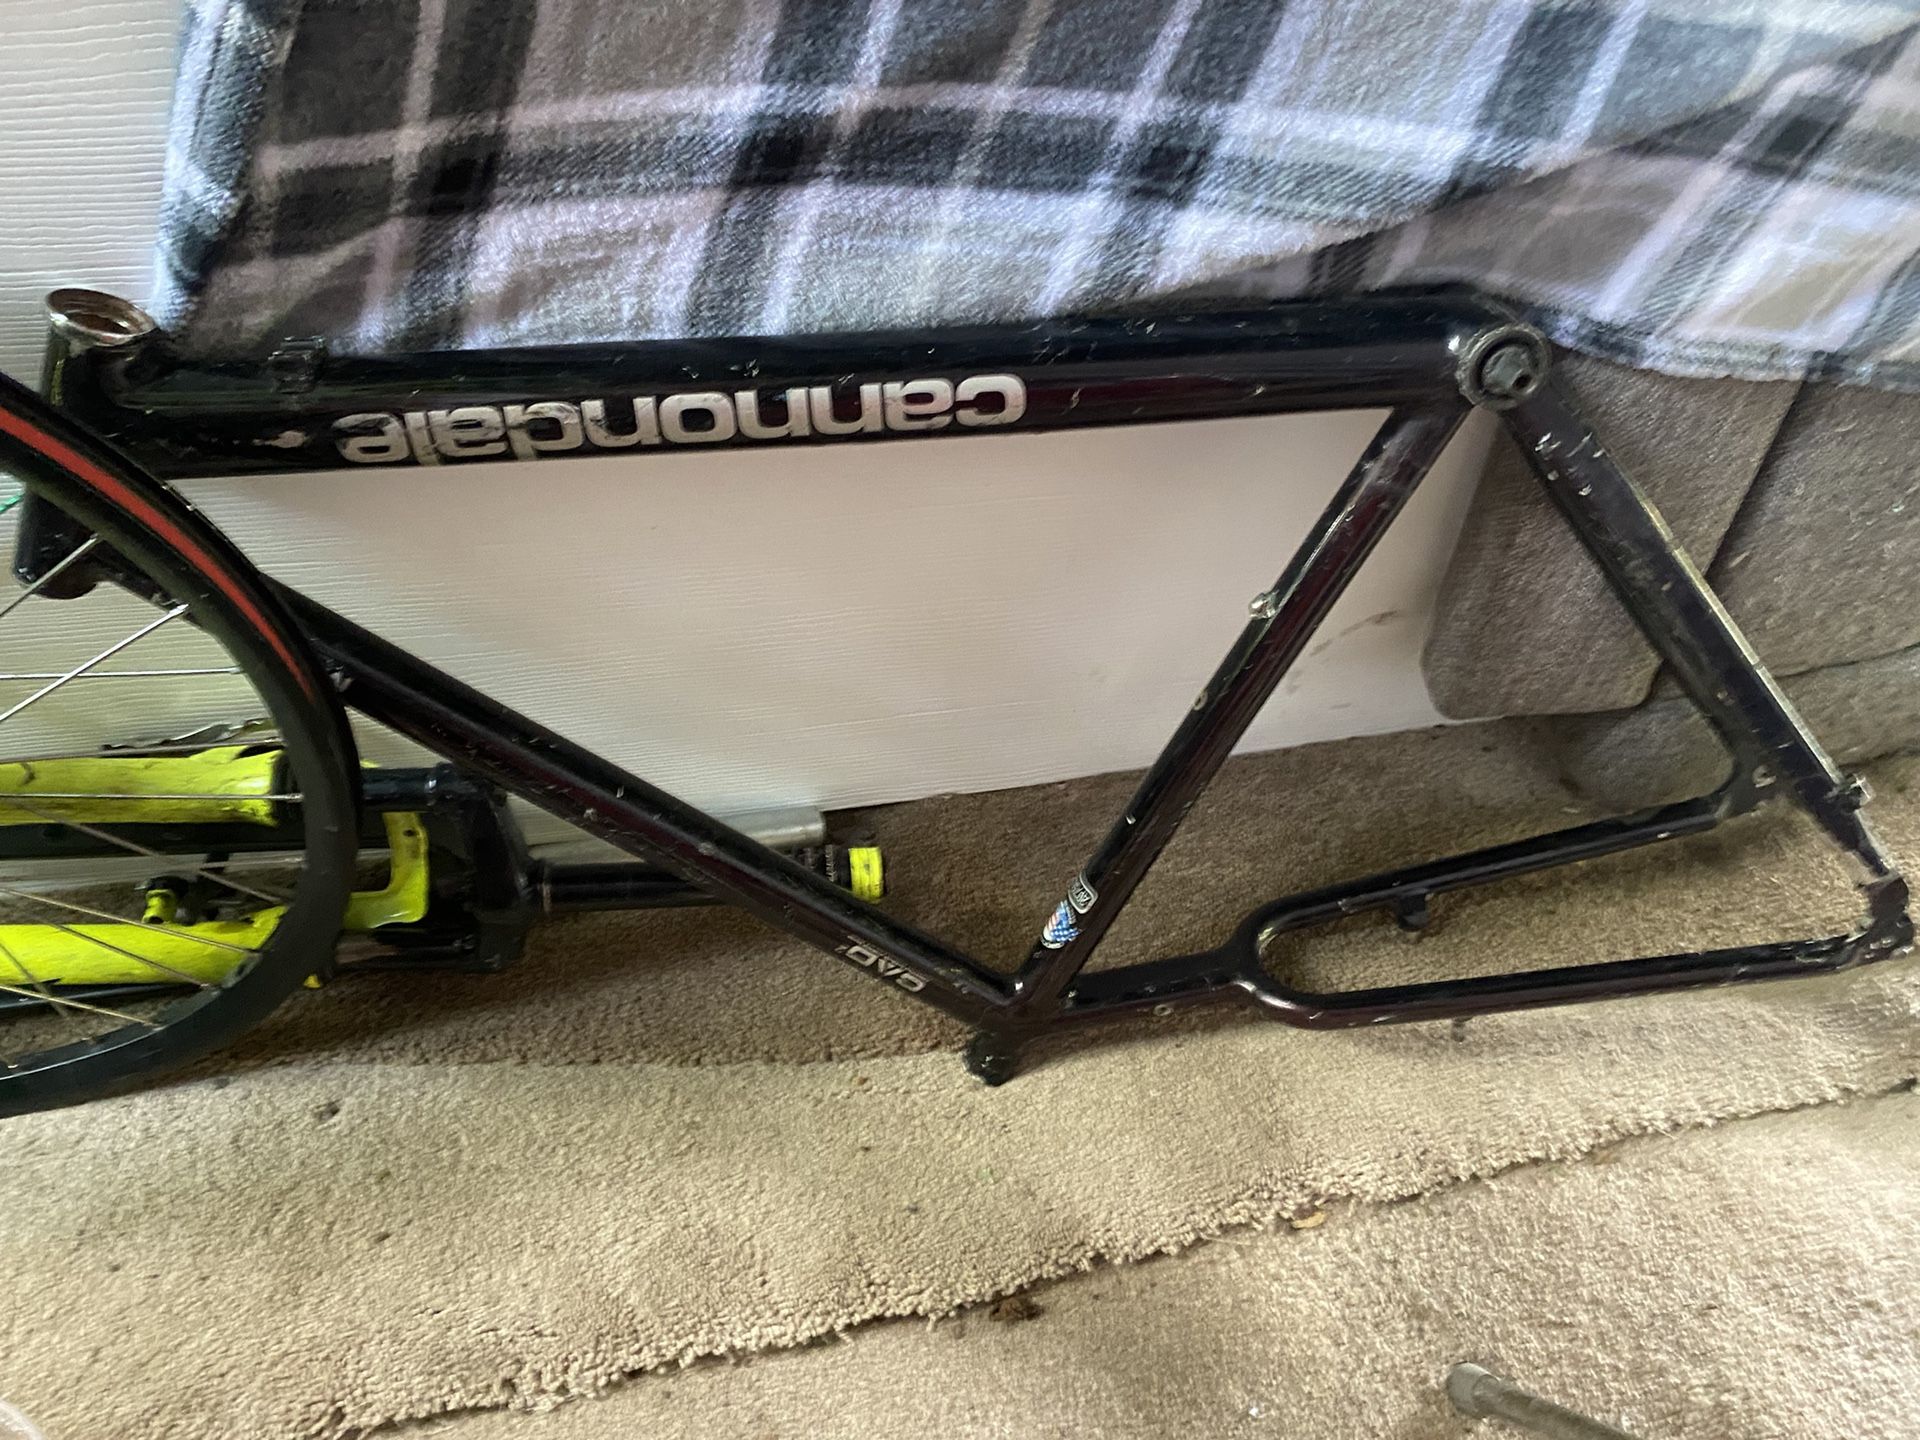 cannondale frame and electric bike motor rim